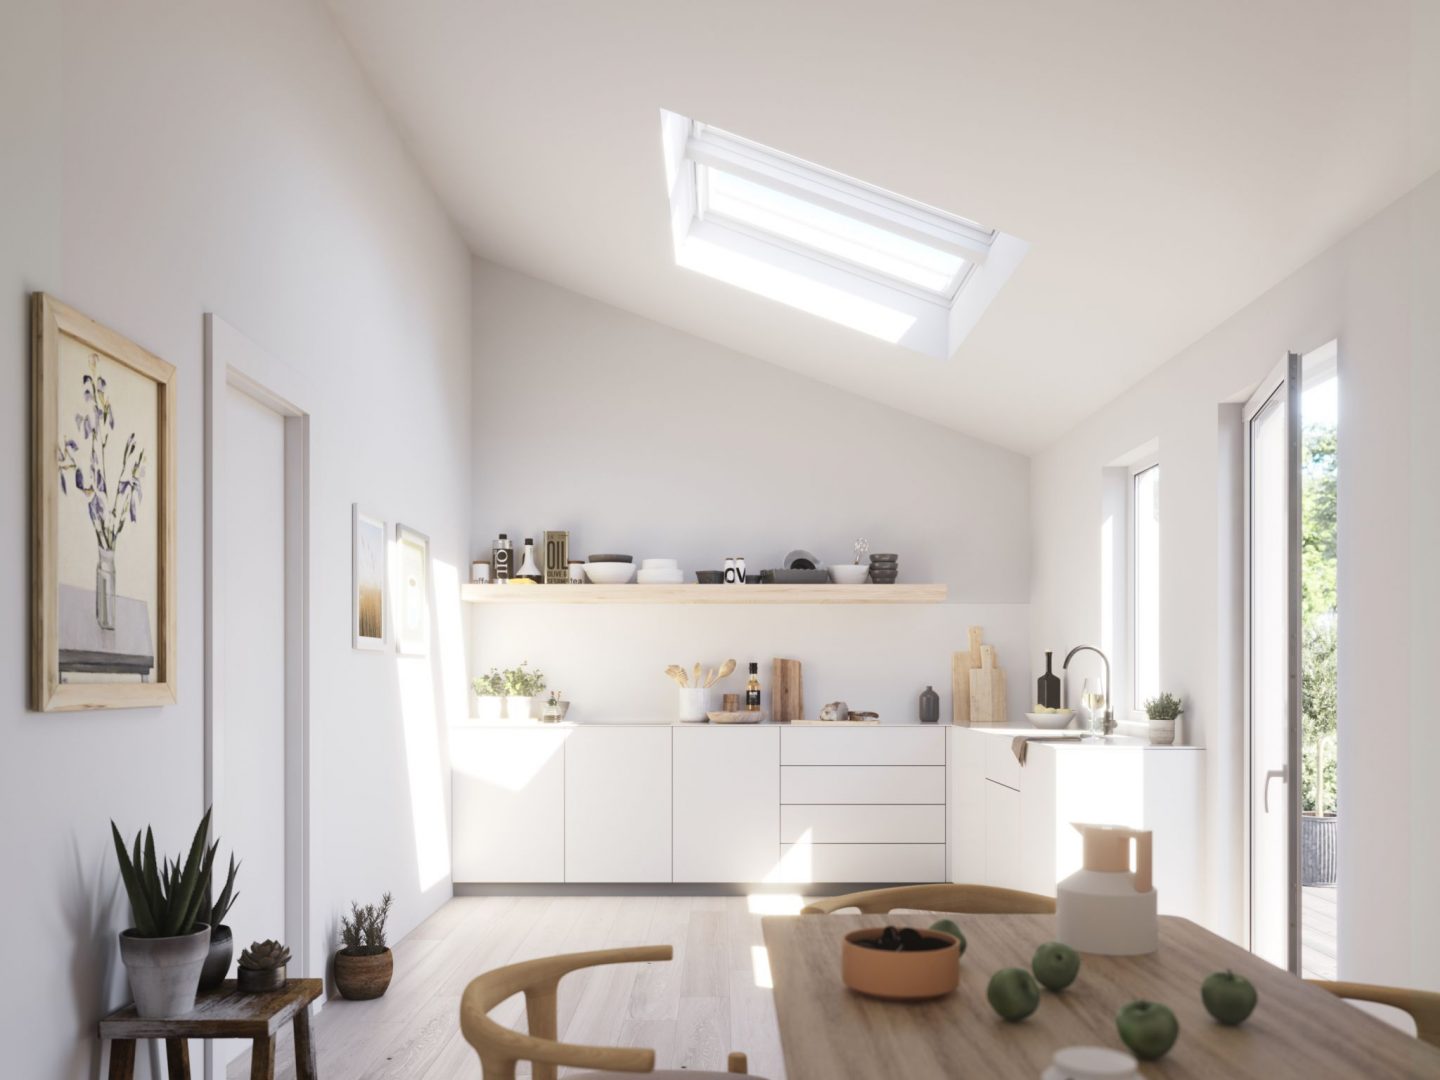 Enhance your home interior with natural light